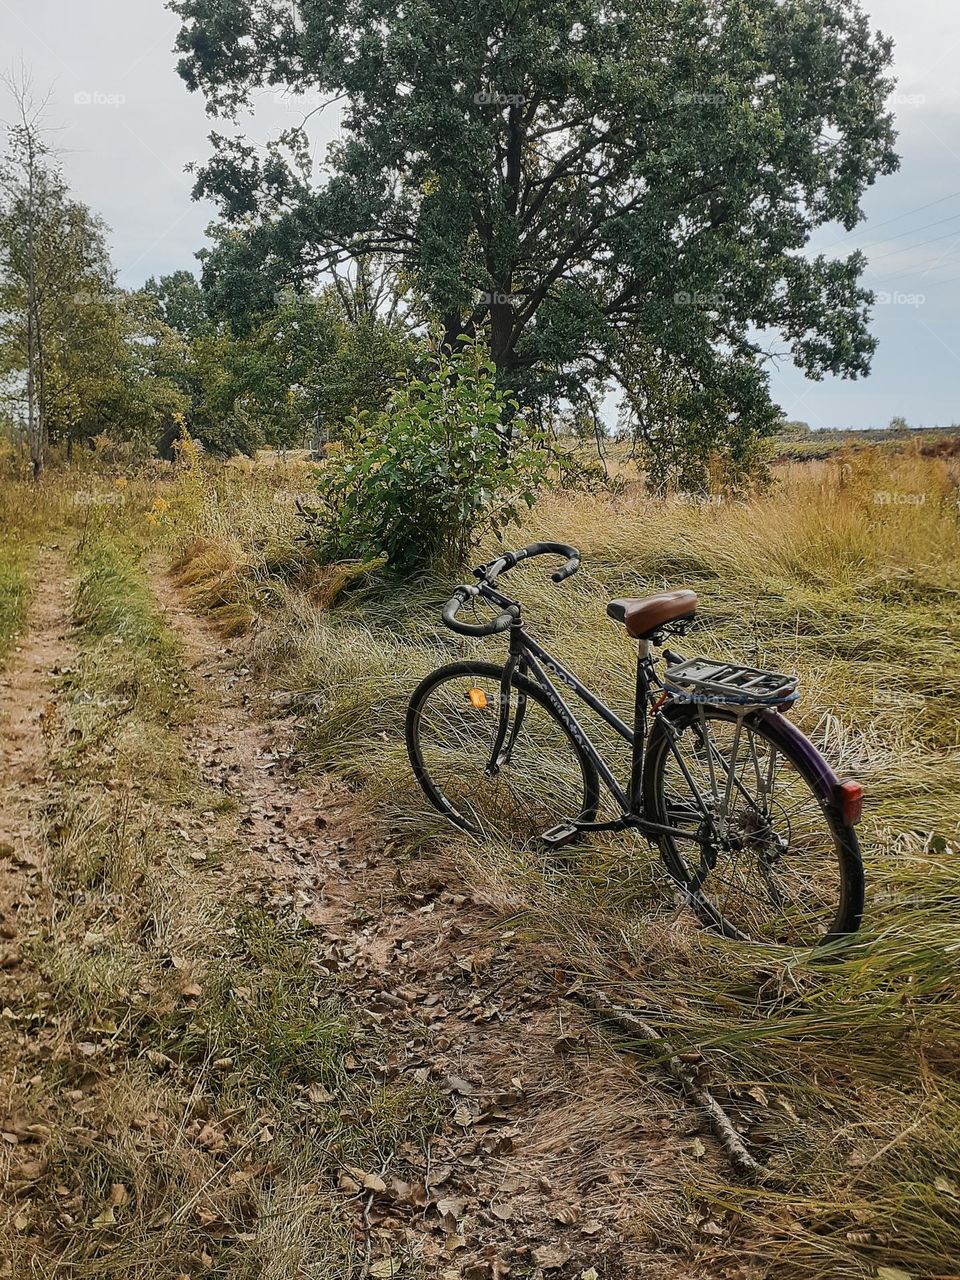 A lonely bicycle among wild greenery